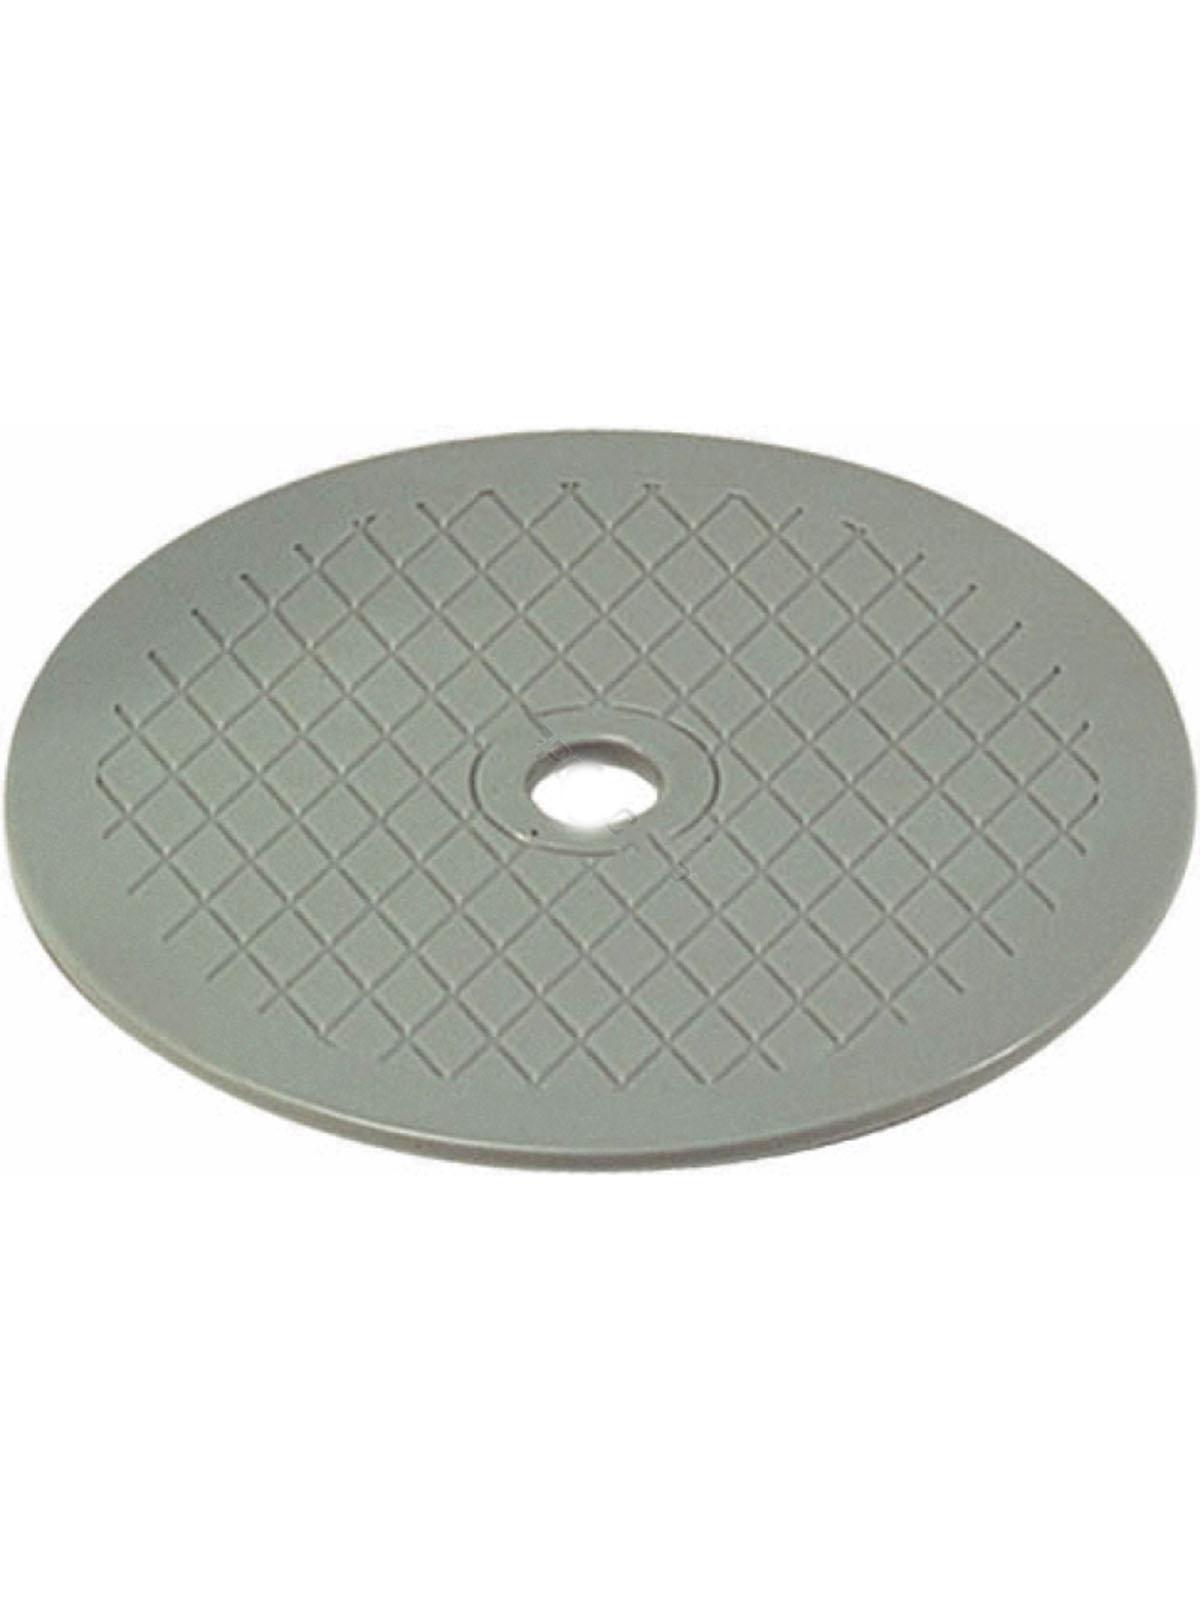 PoolStyle; K015BU24/G;  Replacement Cover for Above Ground Skimmer; Gray